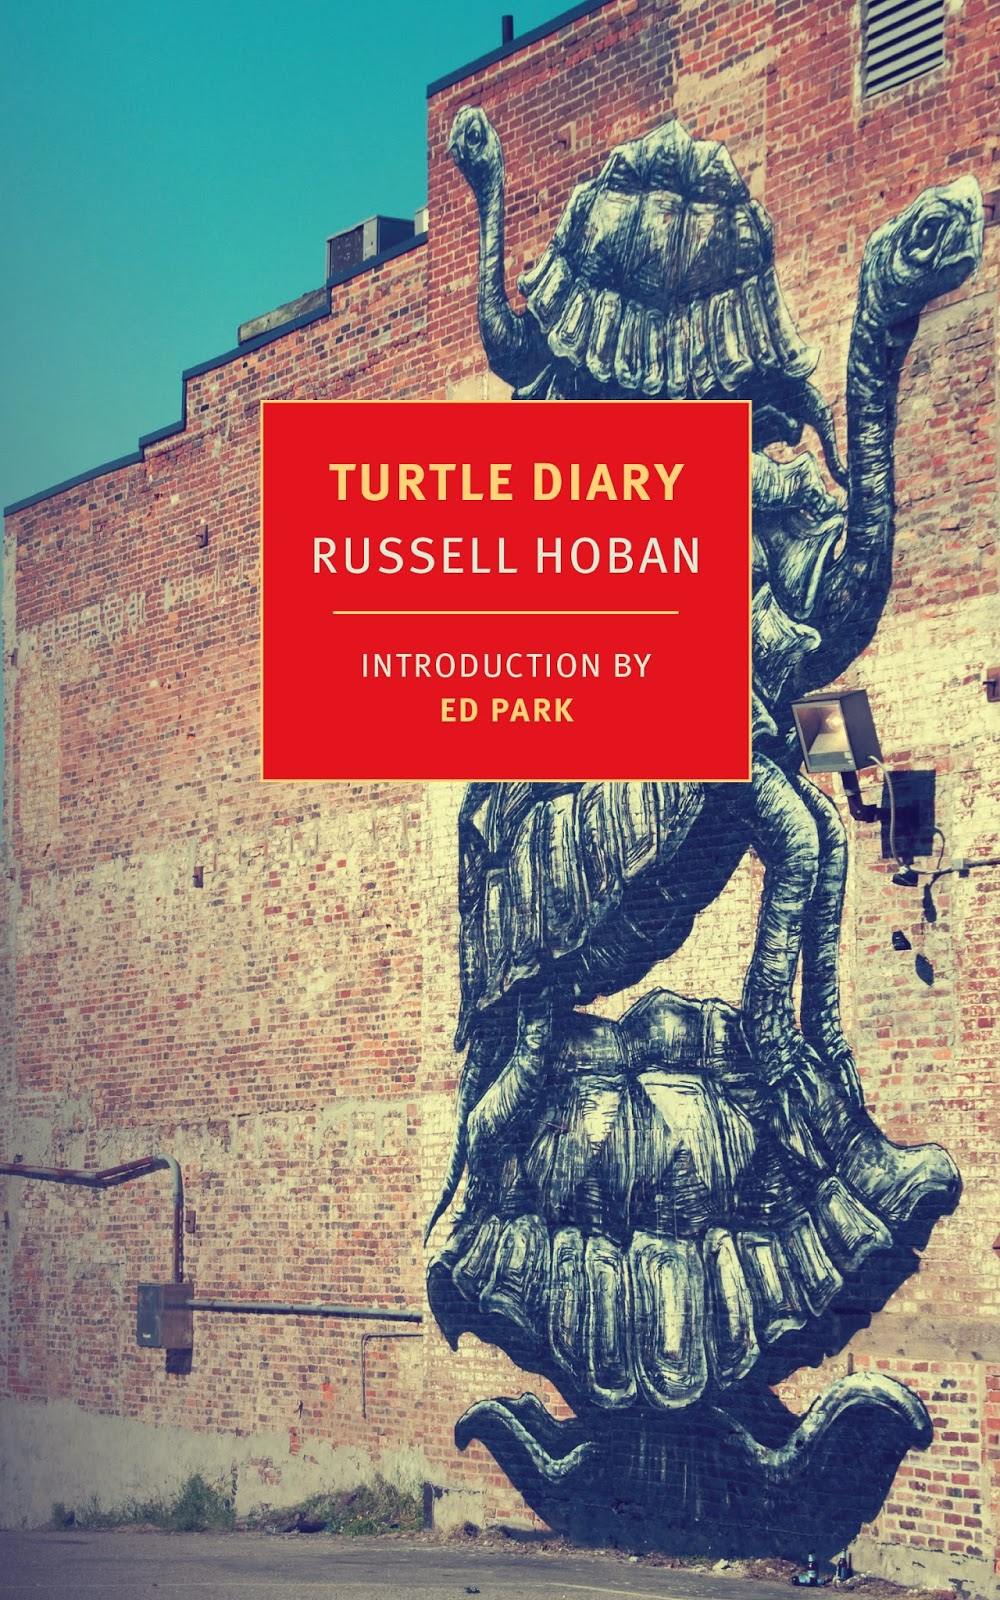 http://discover.halifaxpubliclibraries.ca/?q=title:%22turtle%20diary%22hoban